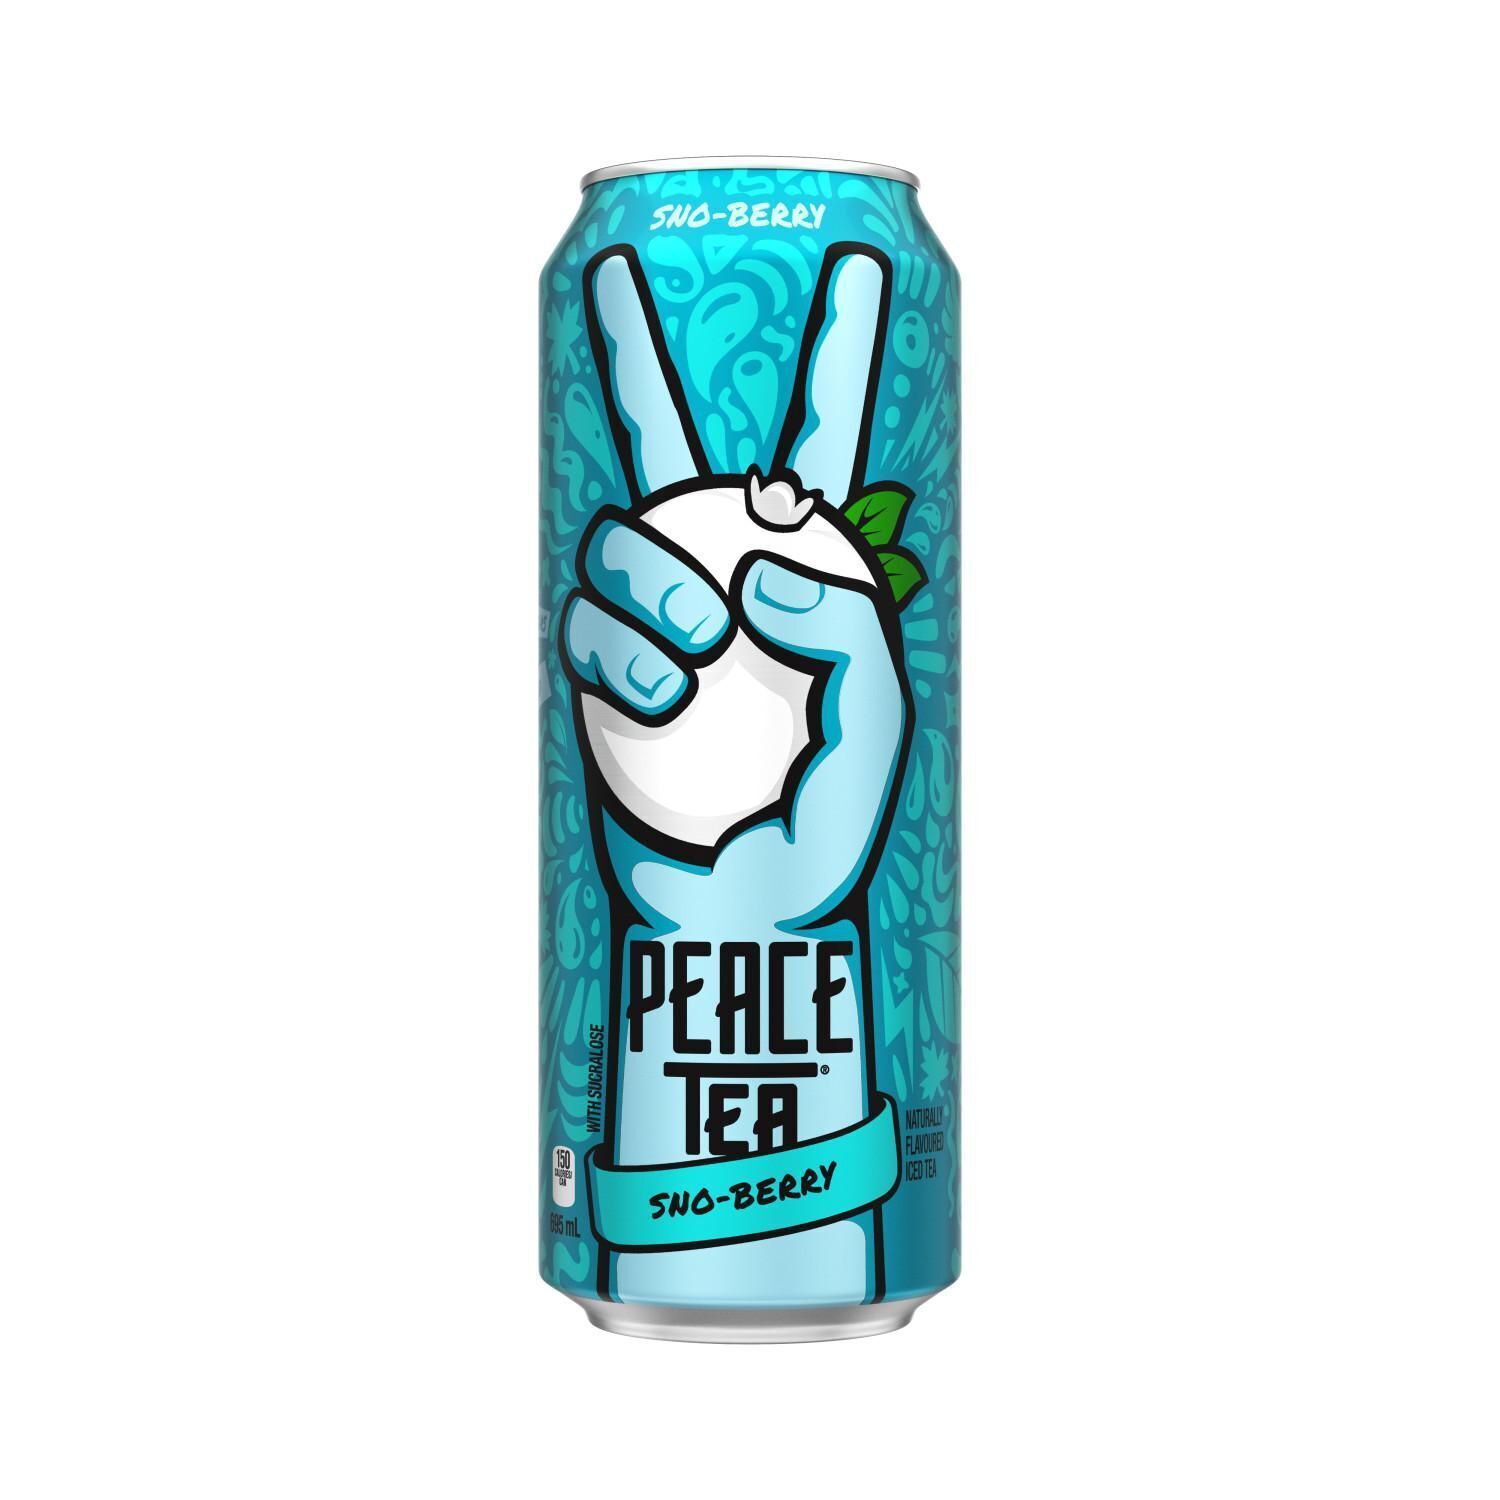 Primary image for 24 Cans of Peace Tea Sno-Berry Iced Tea 23 oz Each- From Canada- Free Shipping